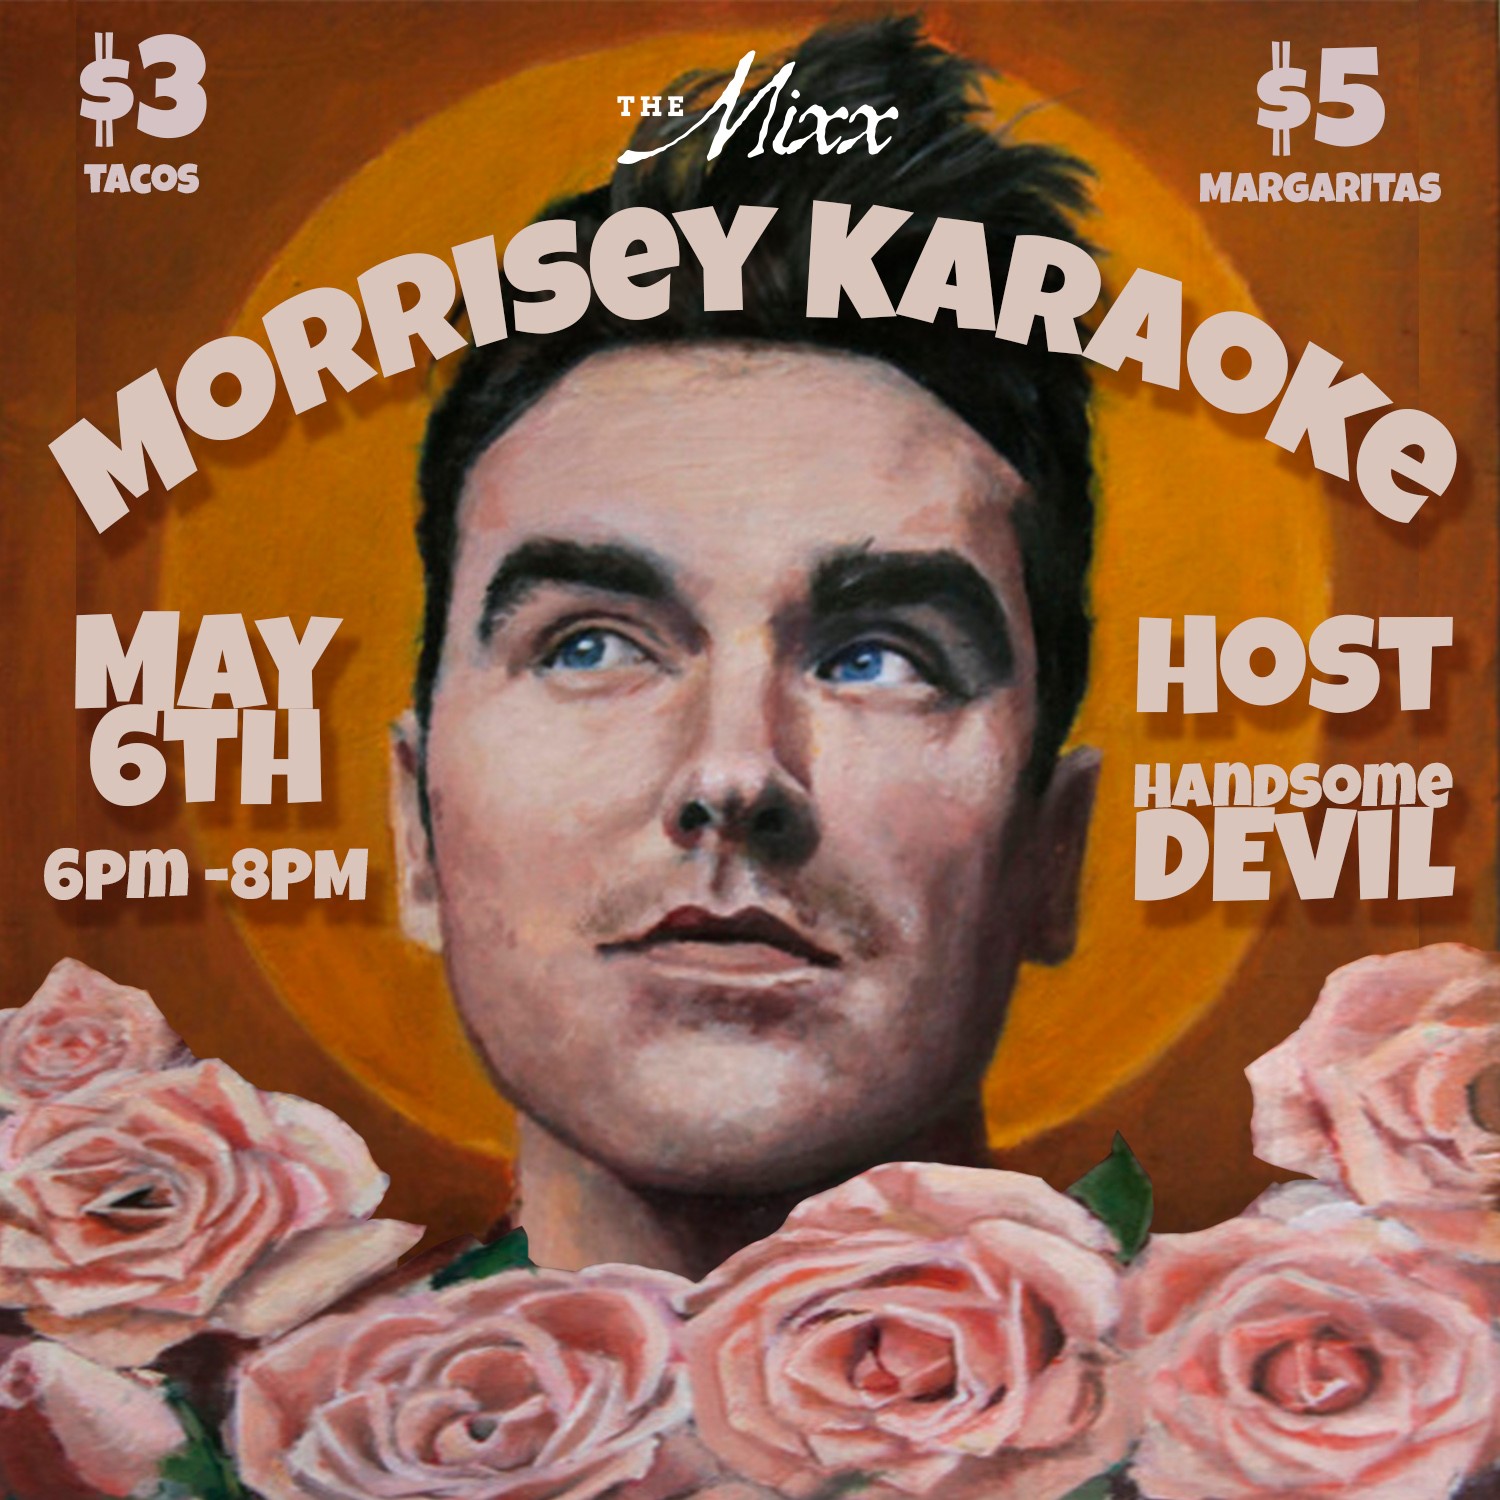 You are currently viewing MORRISSEY KARAOKE